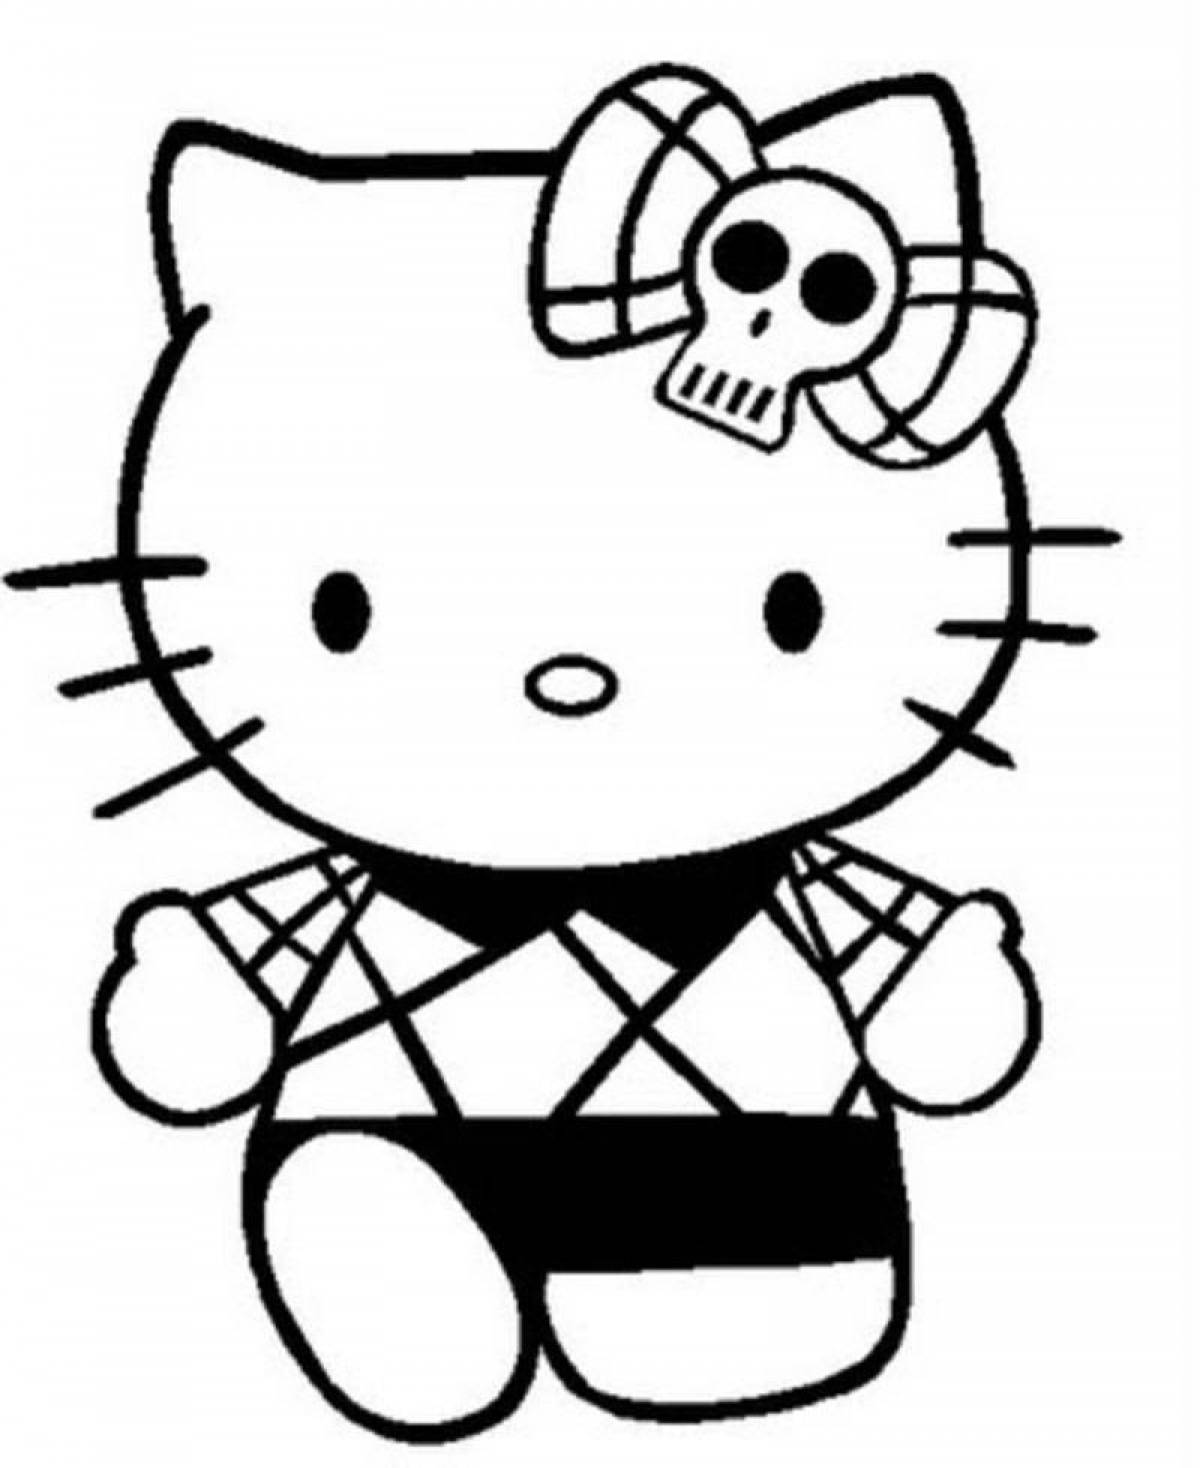 Cute hello kitty with clothes